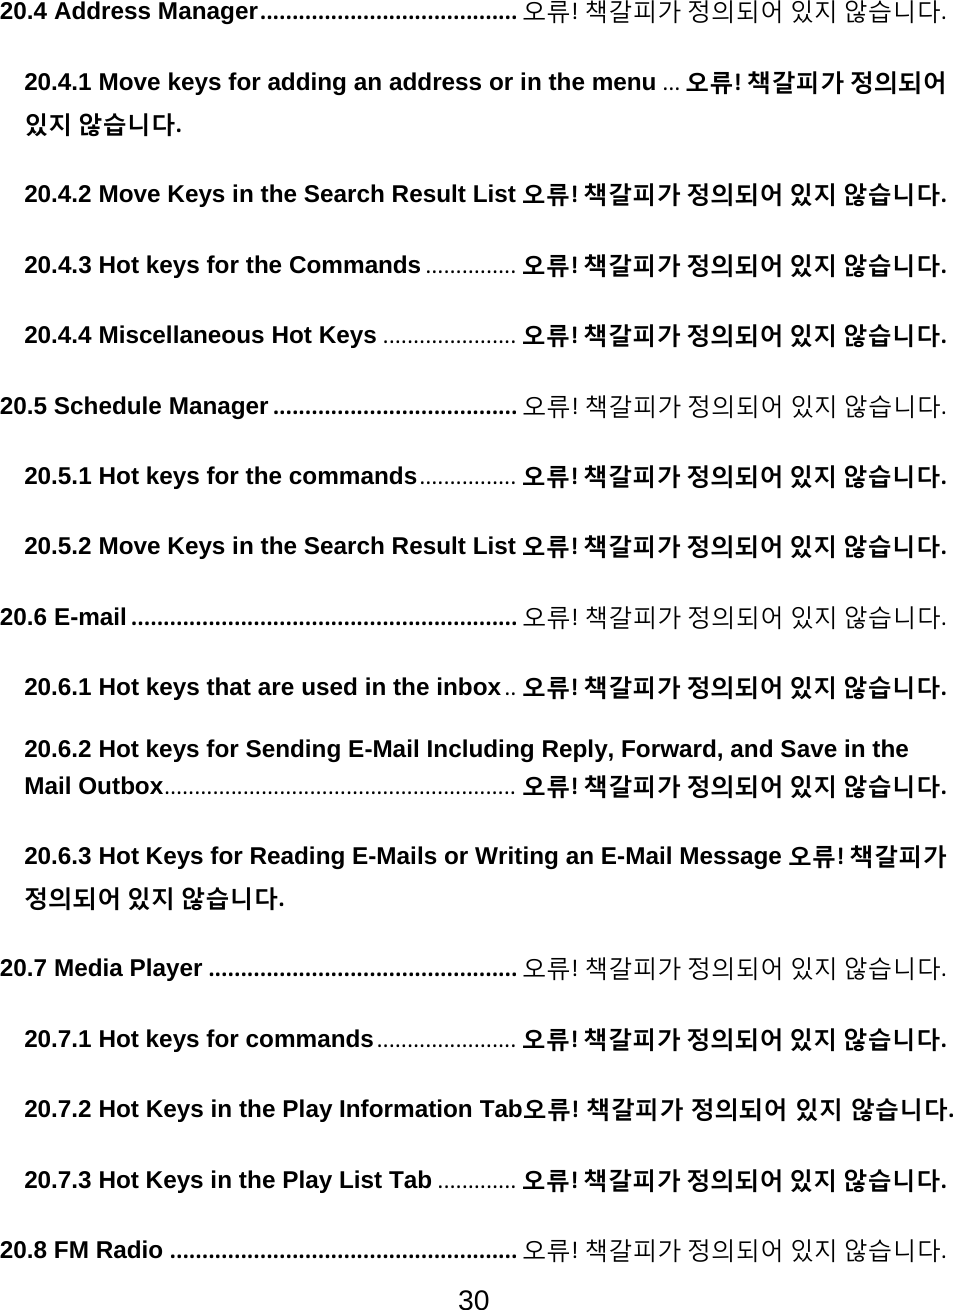 30  20.4 Address Manager........................................ 오류!책갈피가정의되어있지않습니다.20.4.1 Move keys for adding an address or in the menu ... 오류!책갈피가정의되어있지않습니다.20.4.2 Move Keys in the Search Result List 오류!책갈피가정의되어있지않습니다.20.4.3 Hot keys for the Commands ............... 오류!책갈피가정의되어있지않습니다.20.4.4 Miscellaneous Hot Keys ...................... 오류!책갈피가정의되어있지않습니다.20.5 Schedule Manager ...................................... 오류!책갈피가정의되어있지않습니다.20.5.1 Hot keys for the commands................ 오류!책갈피가정의되어있지않습니다.20.5.2 Move Keys in the Search Result List 오류!책갈피가정의되어있지않습니다.20.6 E-mail............................................................ 오류!책갈피가정의되어있지않습니다.20.6.1 Hot keys that are used in the inbox.. 오류!책갈피가정의되어있지않습니다.20.6.2 Hot keys for Sending E-Mail Including Reply, Forward, and Save in the Mail Outbox.......................................................... 오류!책갈피가정의되어있지않습니다.20.6.3 Hot Keys for Reading E-Mails or Writing an E-Mail Message 오류!책갈피가정의되어있지않습니다.20.7 Media Player ................................................ 오류!책갈피가정의되어있지않습니다.20.7.1 Hot keys for commands....................... 오류!책갈피가정의되어있지않습니다.20.7.2 Hot Keys in the Play Information Tab오류!책갈피가정의되어있지않습니다.20.7.3 Hot Keys in the Play List Tab ............. 오류!책갈피가정의되어있지않습니다.20.8 FM Radio ...................................................... 오류!책갈피가정의되어있지않습니다.